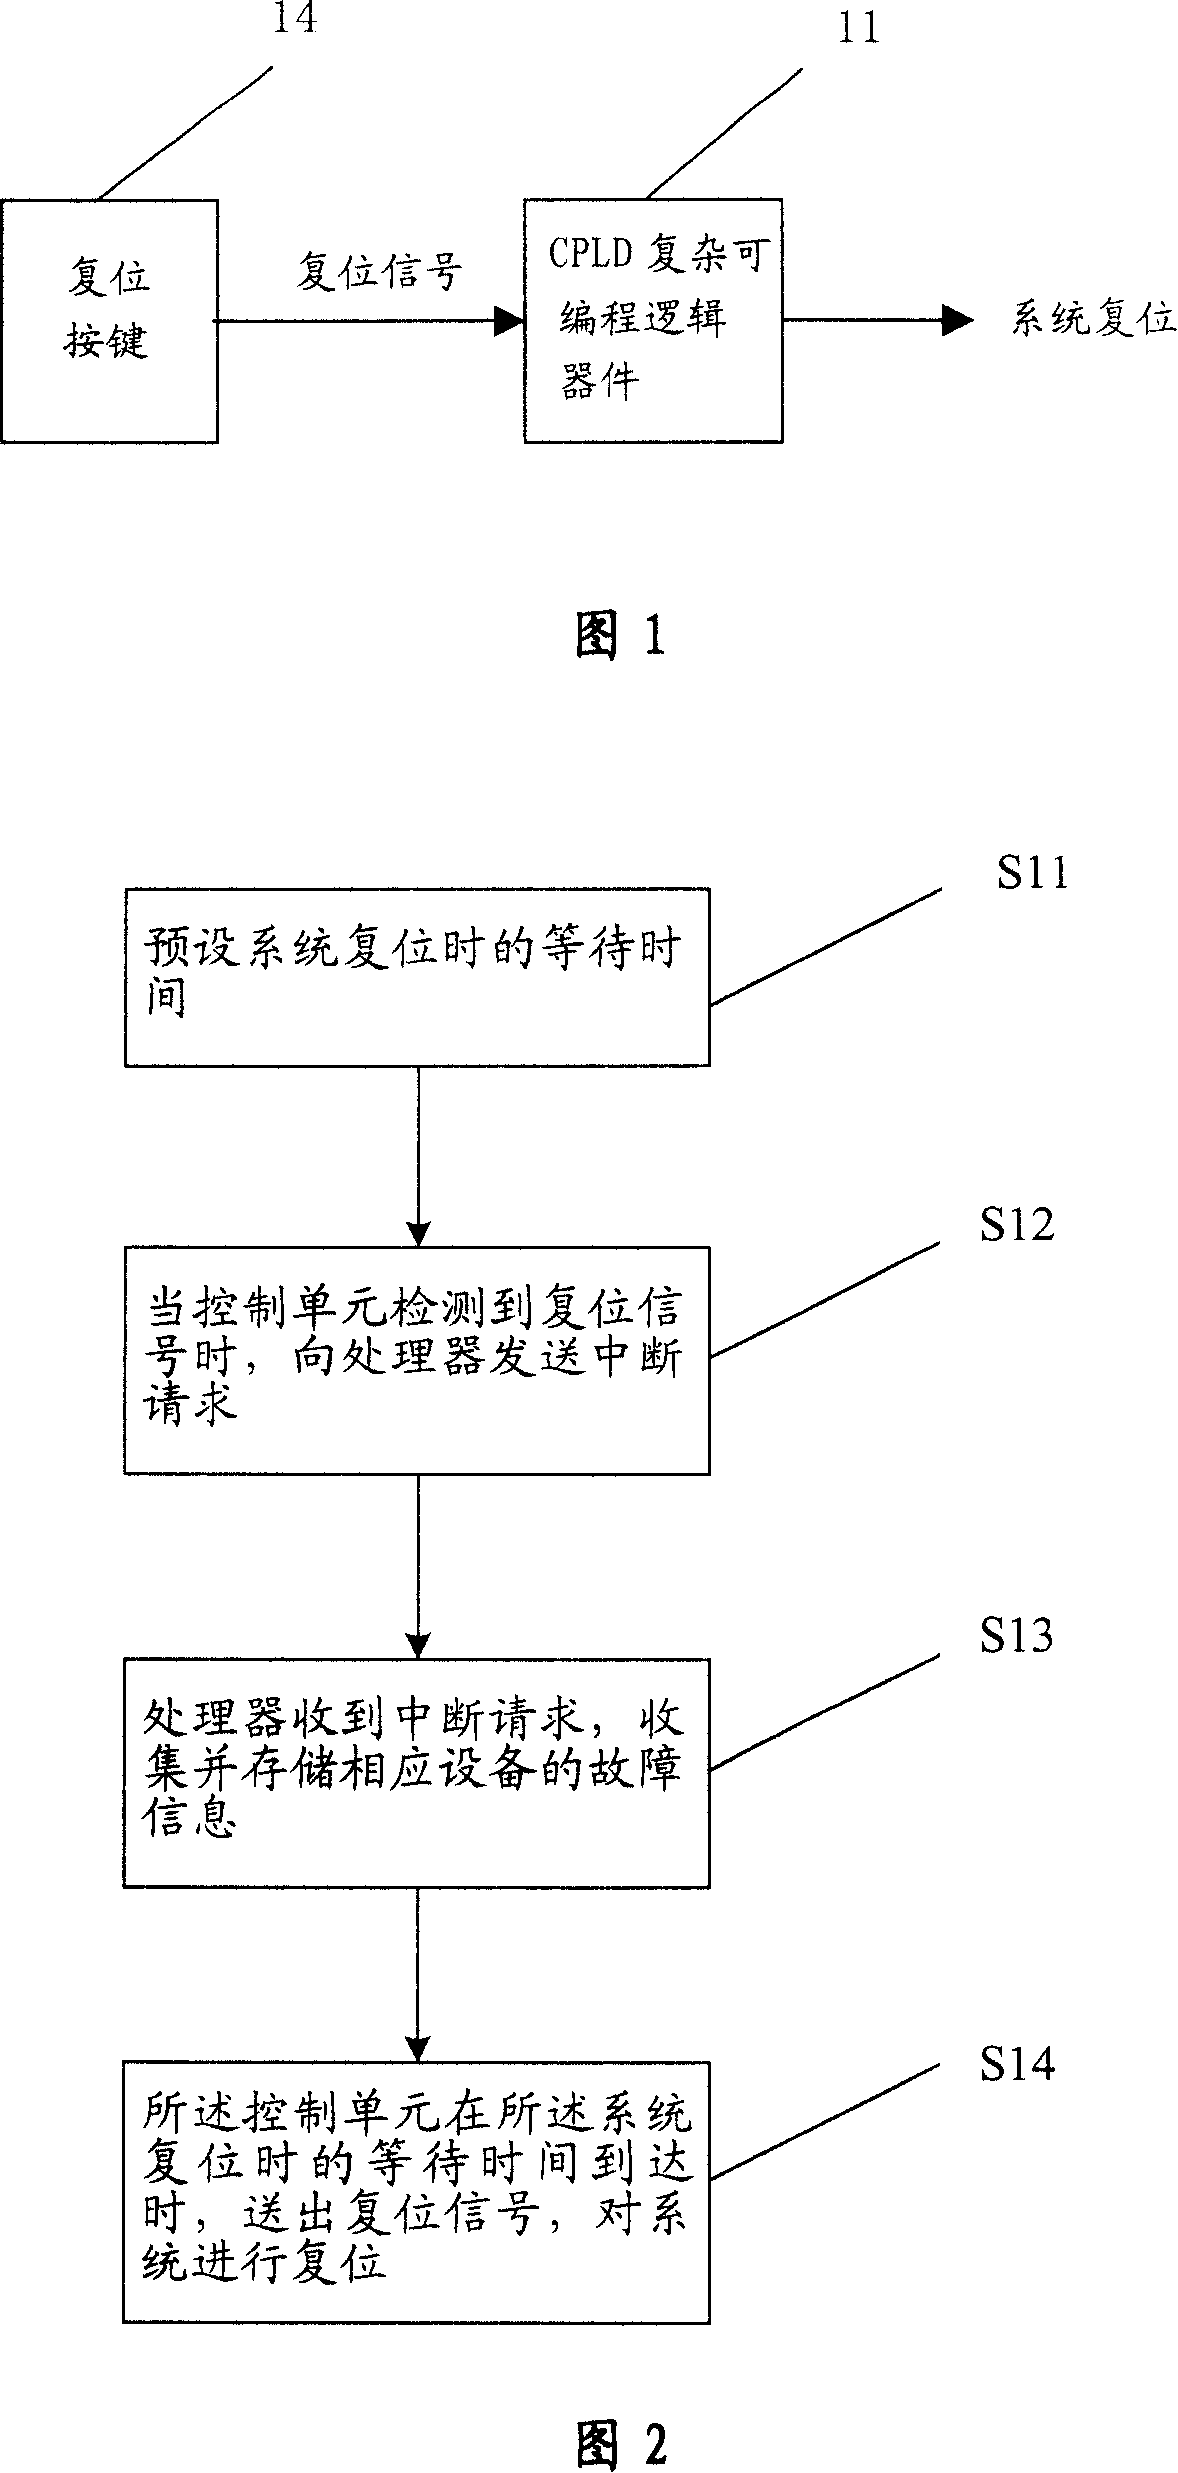 Reset processing method and device for system